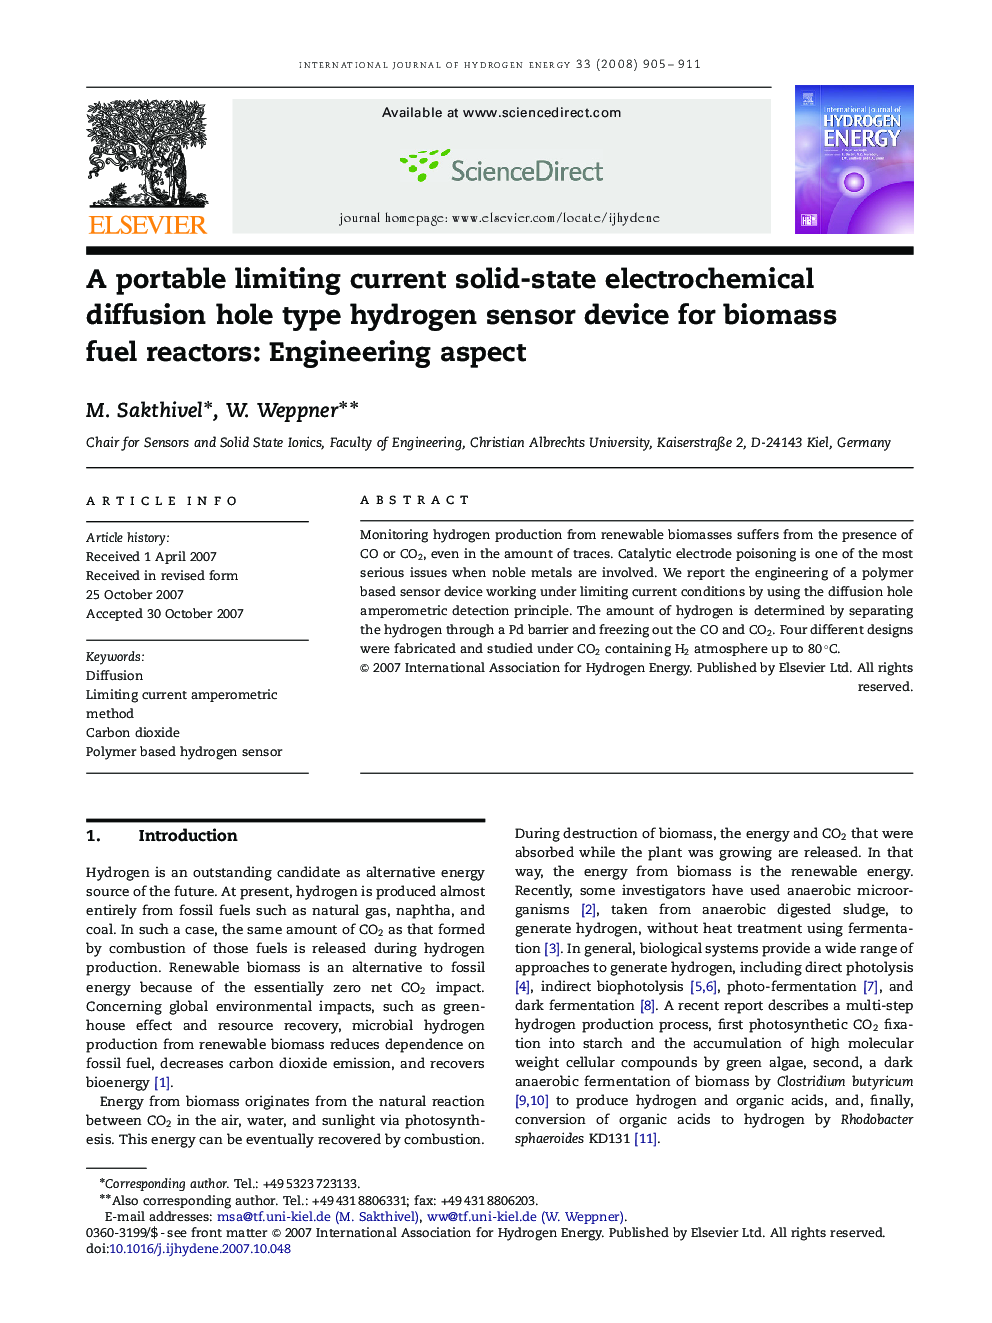 A portable limiting current solid-state electrochemical diffusion hole type hydrogen sensor device for biomass fuel reactors: Engineering aspect